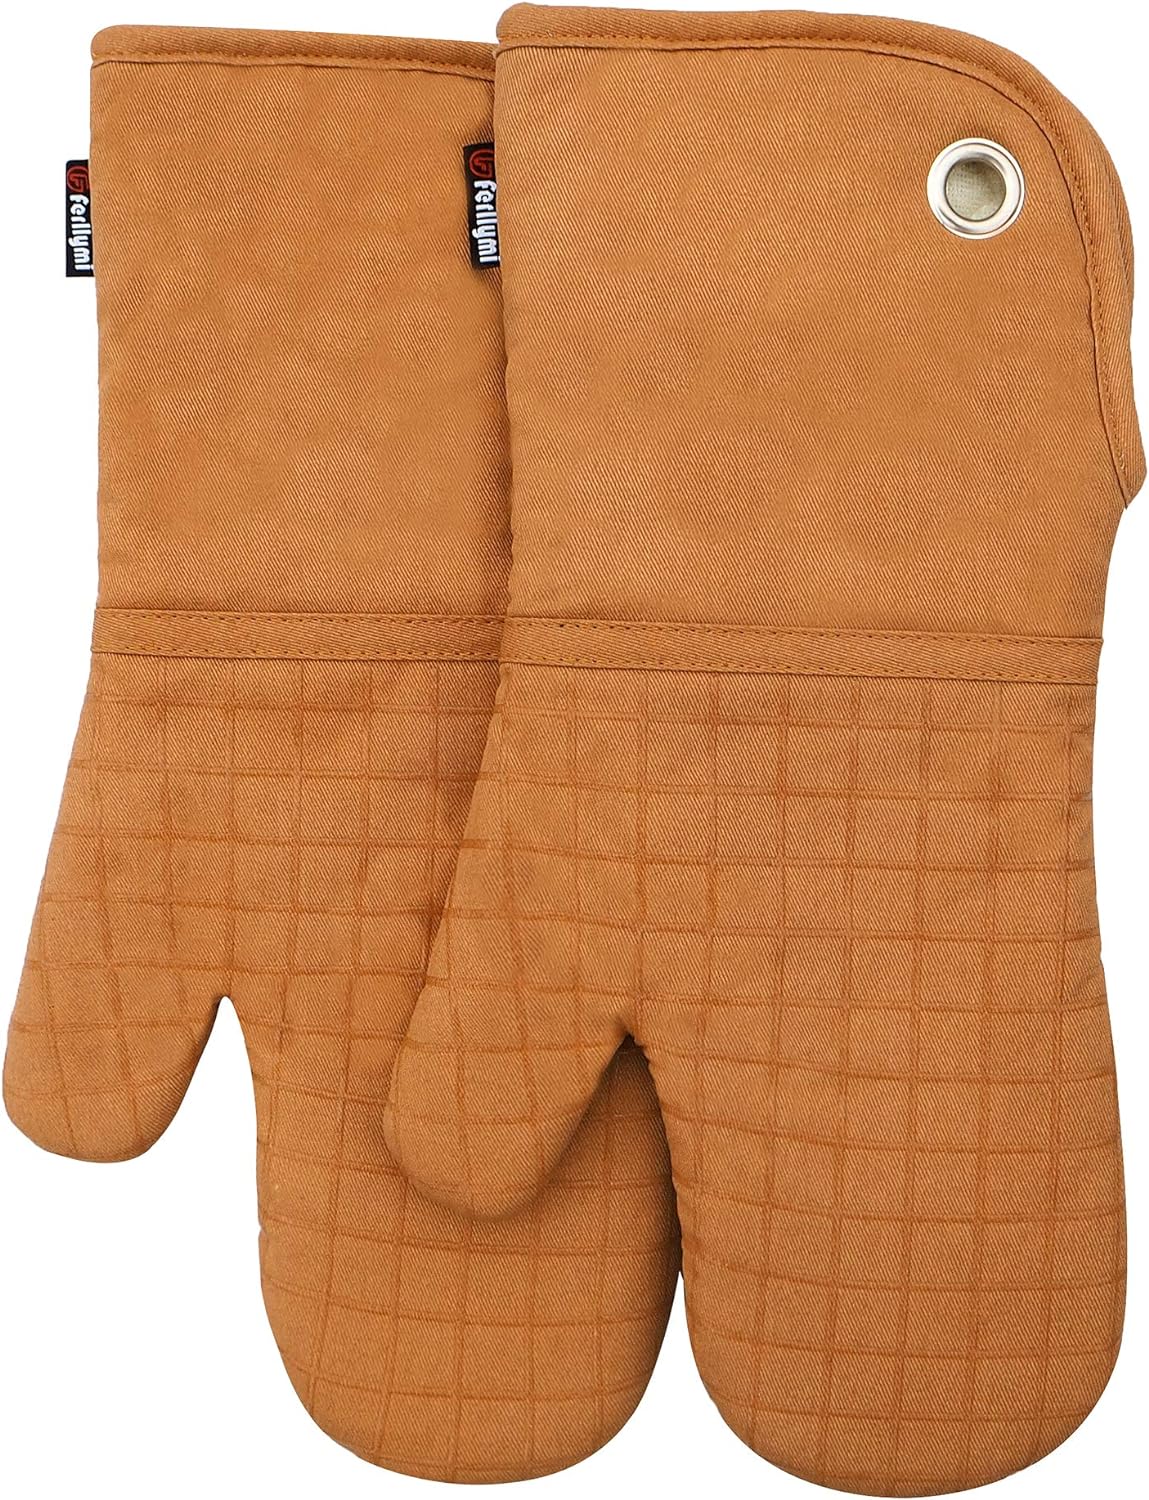 Details about   Silicone Non Slip Heat Resistant Waterproof Oven Mitts Set Cooking Gloves Orange 